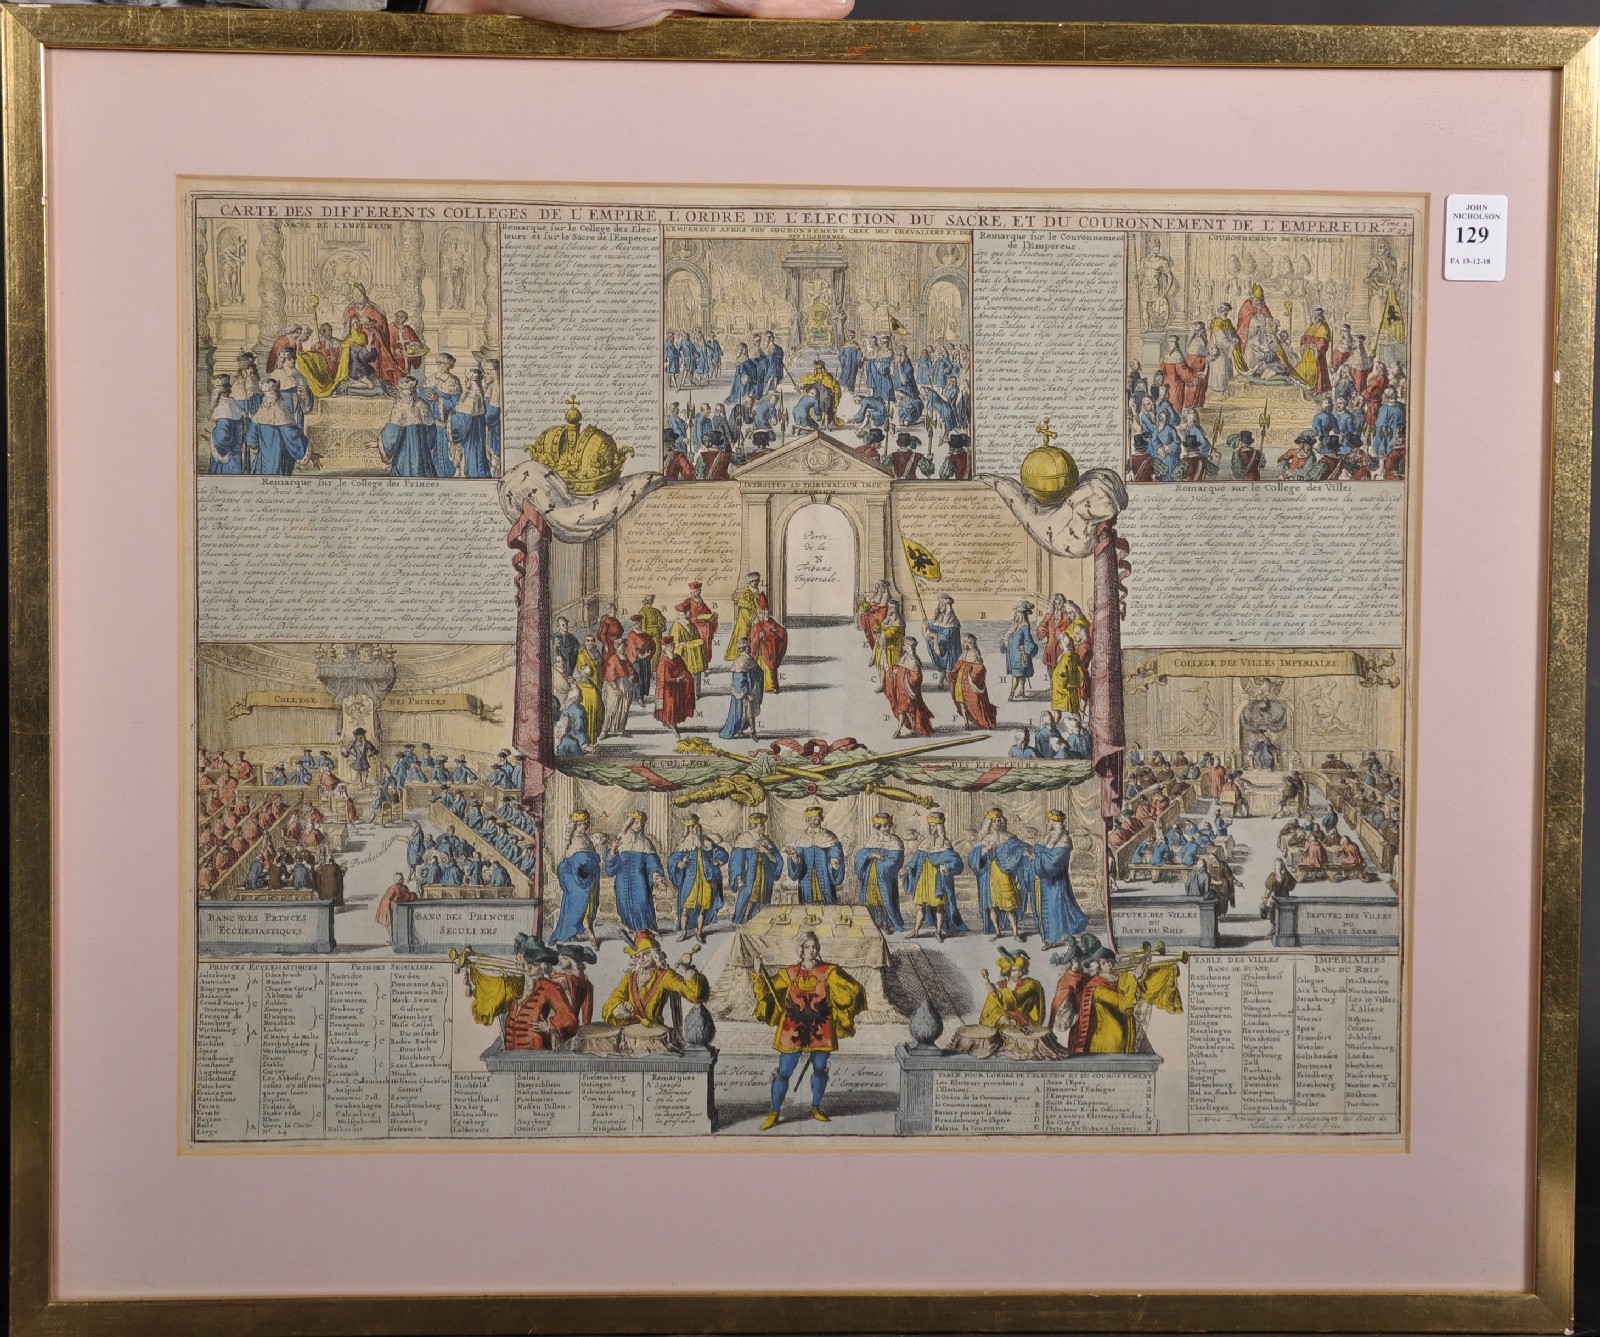 18th Century French School. French Colleges, Coloured Engraving, 13.5" x 17.5". - Image 2 of 3